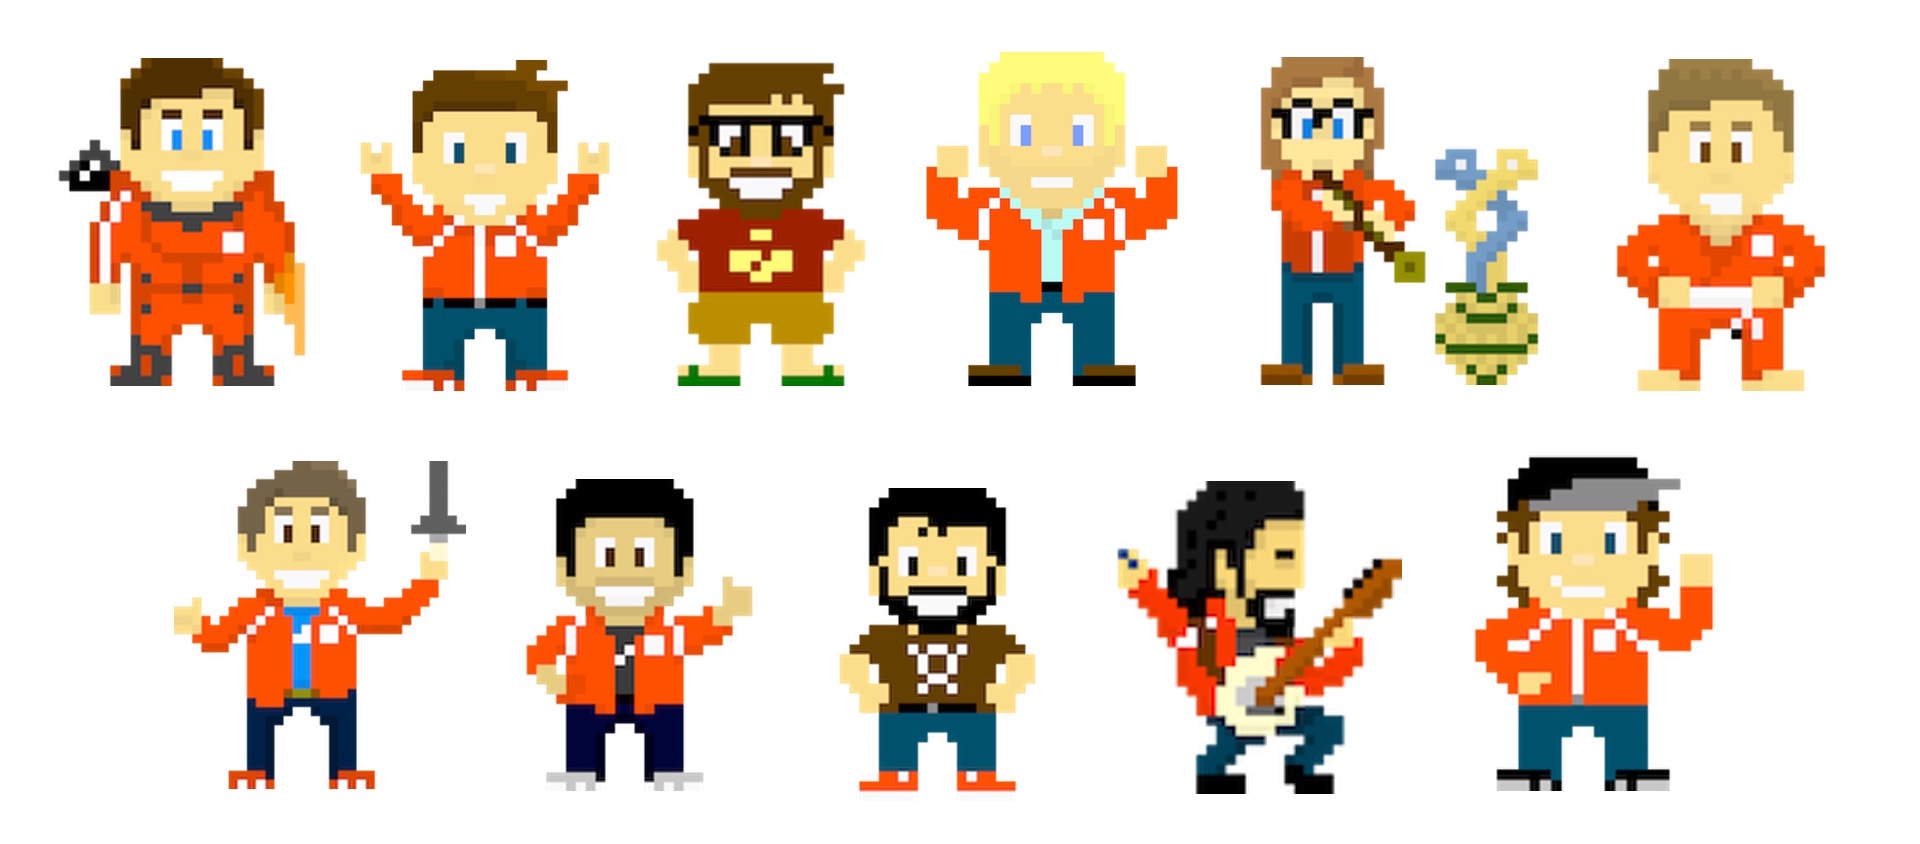 The DevNetwork as 8-bit characters